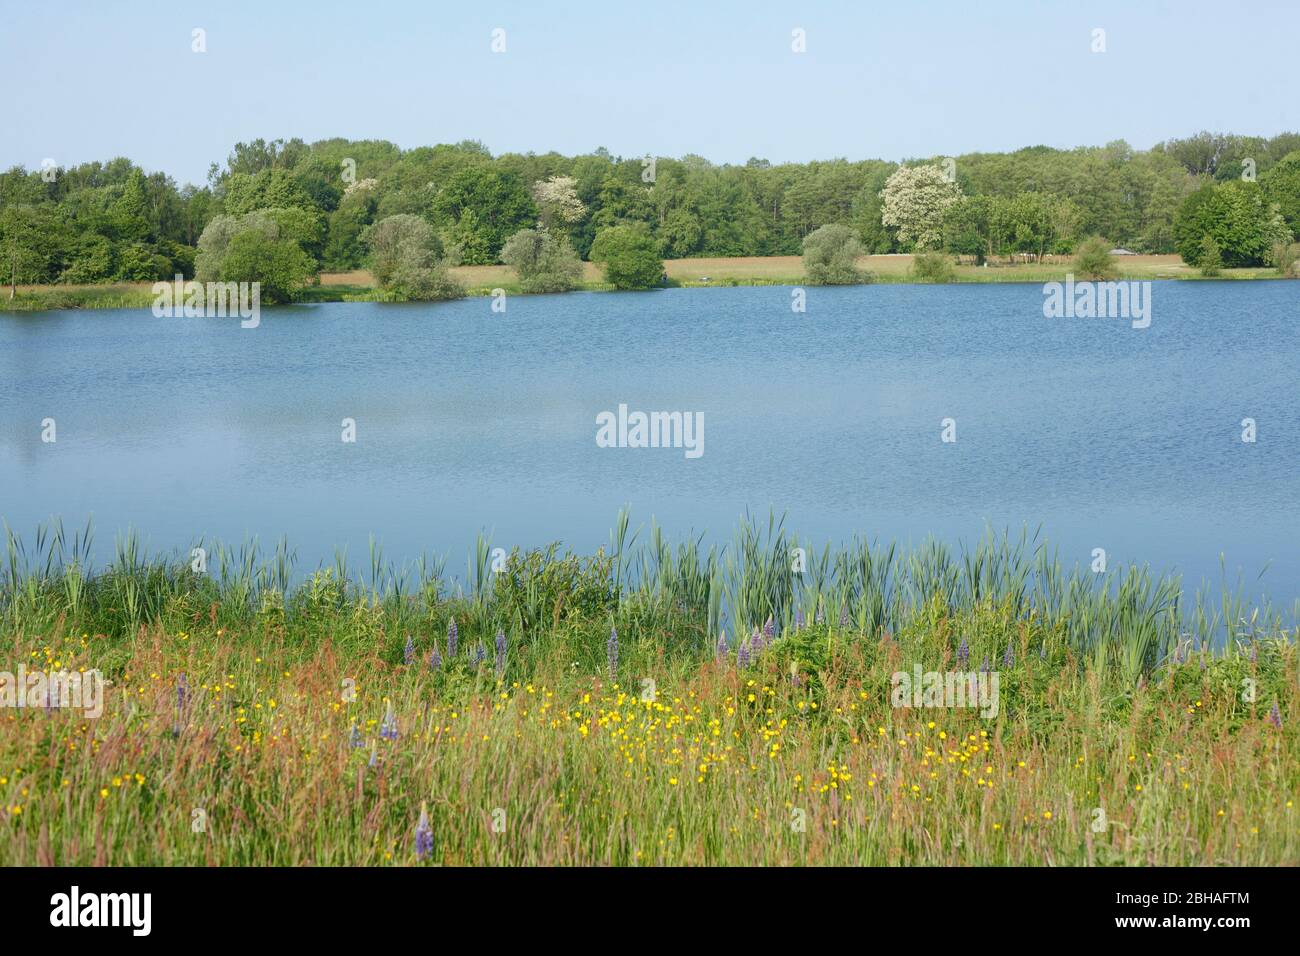 Hartensbergsee, Goldenstedt, Vechta district, Lower Saxony, Germany, Europe Stock Photo